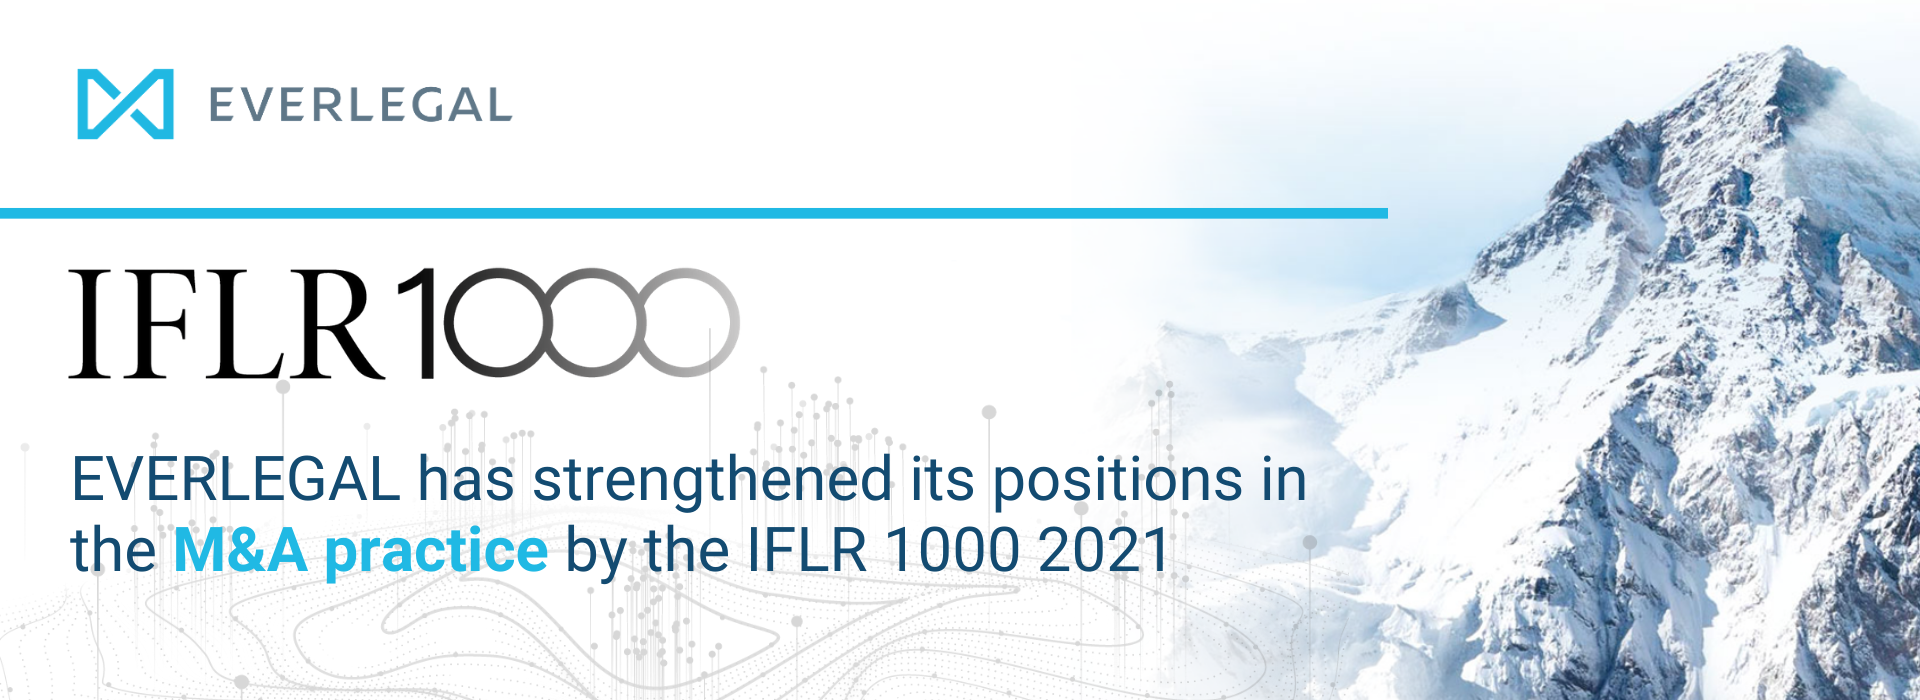 EVERLEGAL has strengthened its positions in the M&A practice according to the IFLR1000 2021